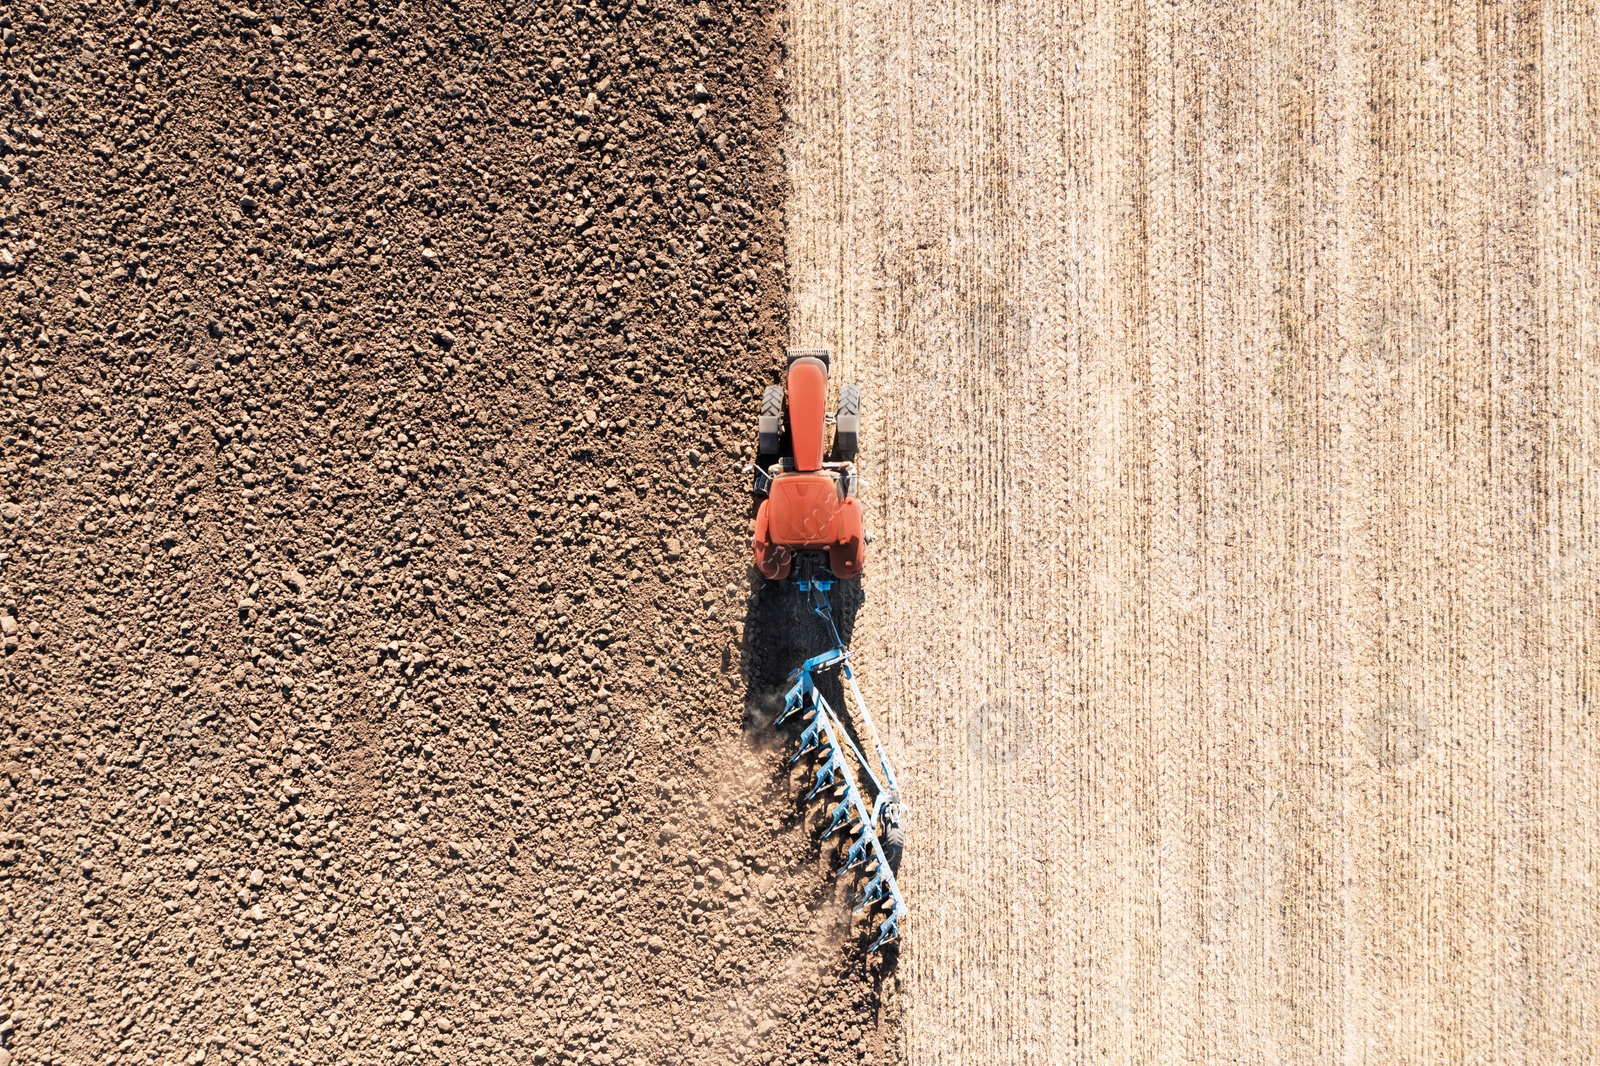 Image of Tractor pulling plow in agricultural field on sunny day, aerial view